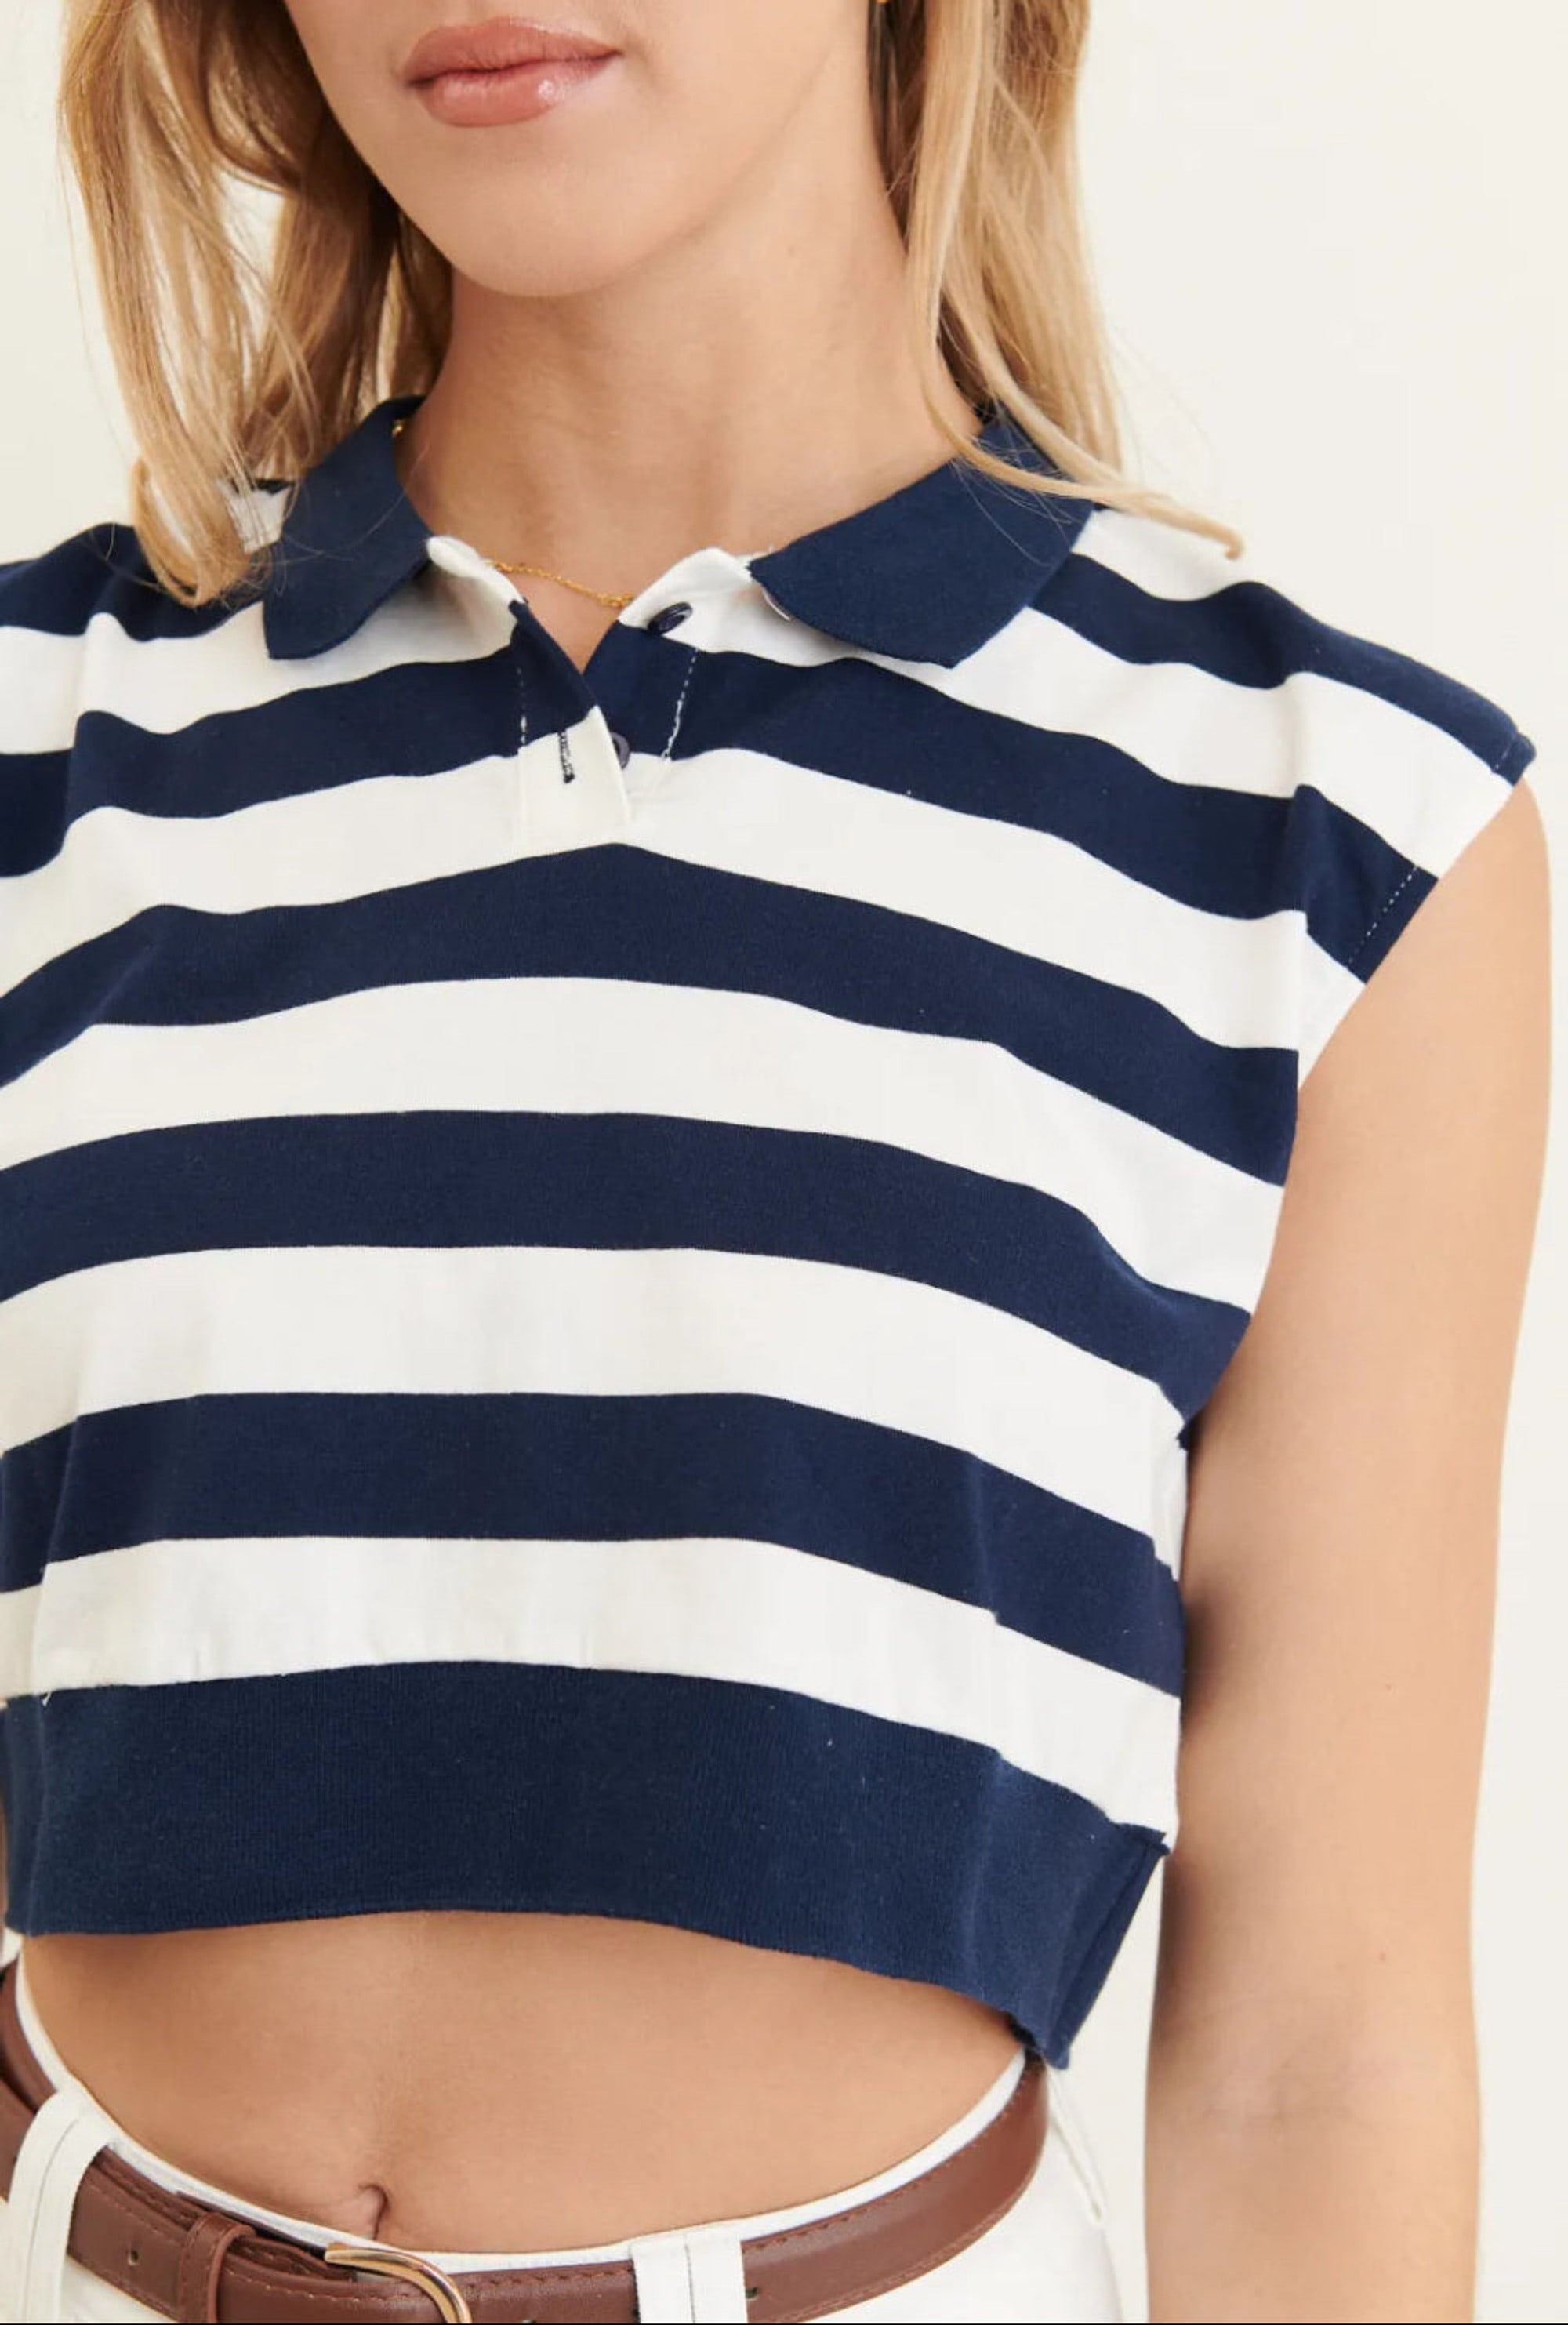 Clever Alice French Crop in Navy and White 